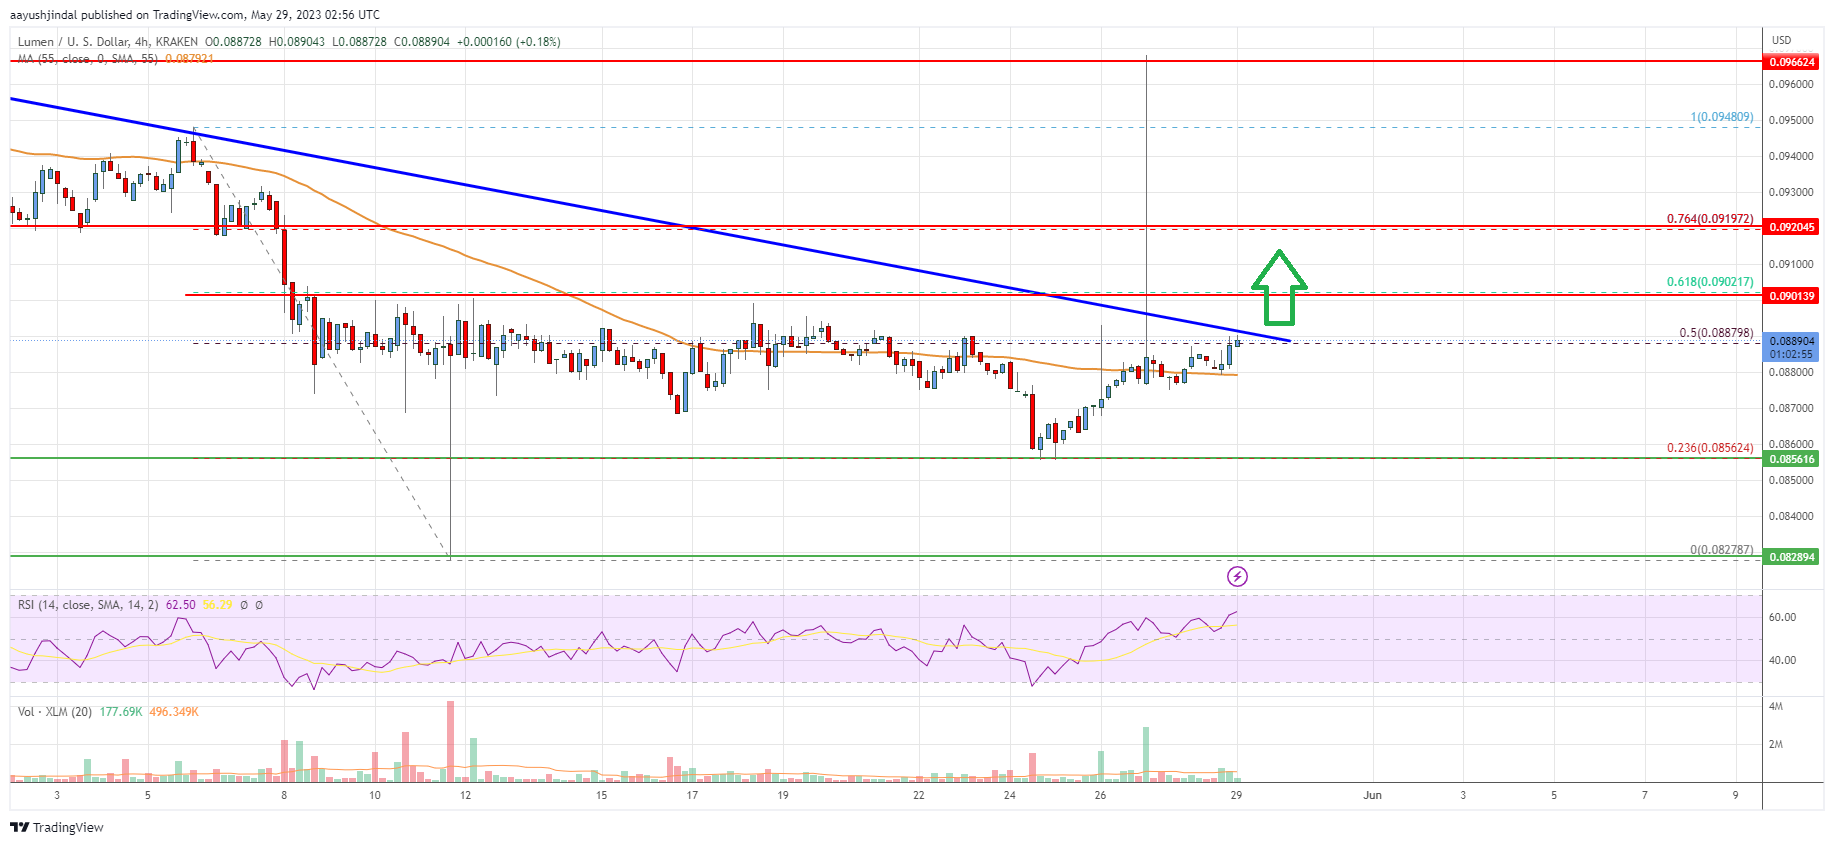 Stellar Lumen (XLM) Price Could Surge If It Clears $0.090